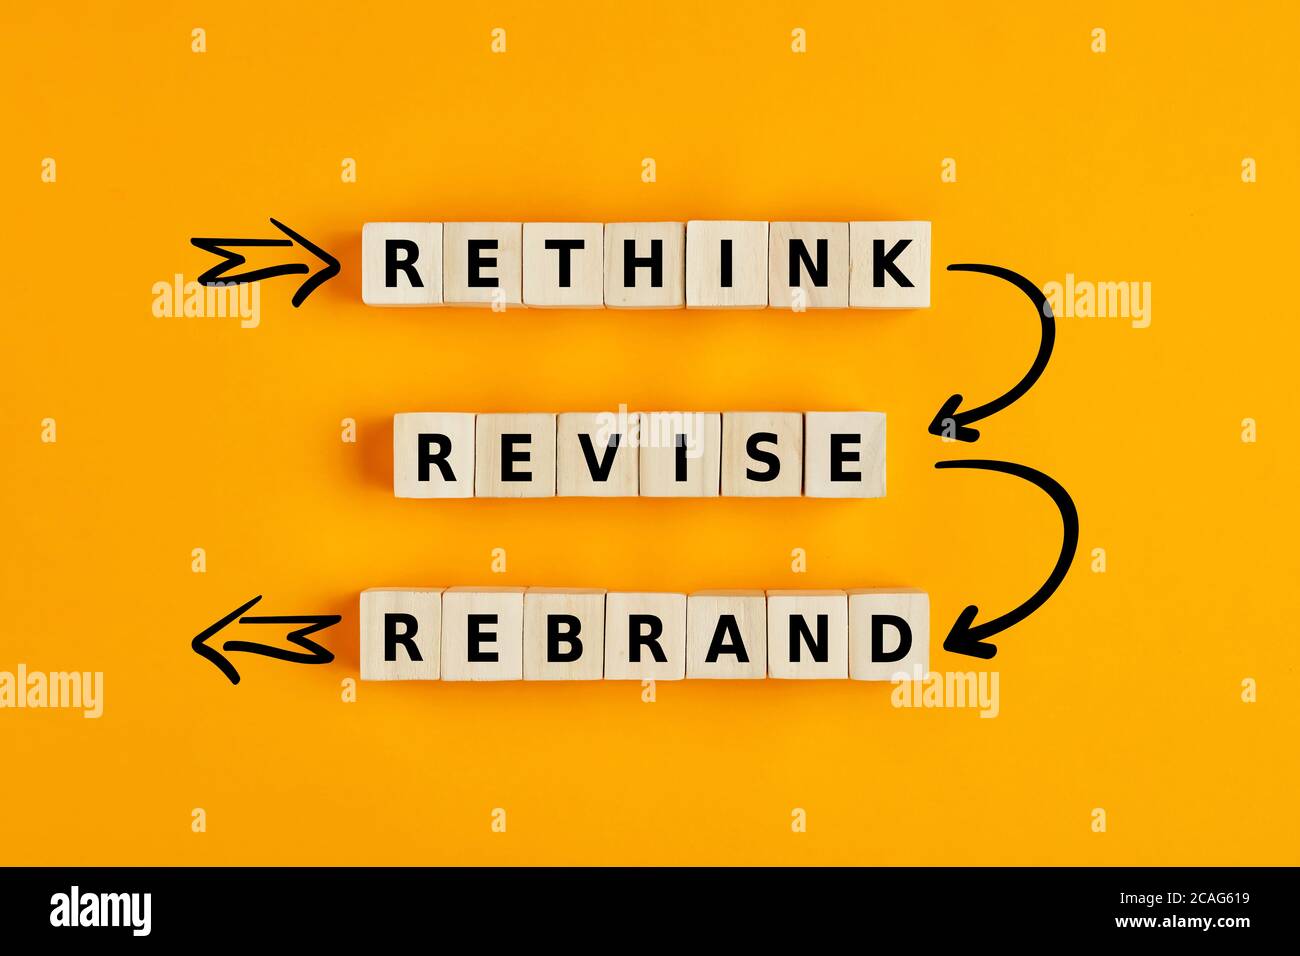 Business management branding concept of rethink revise and rebrand words on wooden cubes with process arrows. Stock Photo